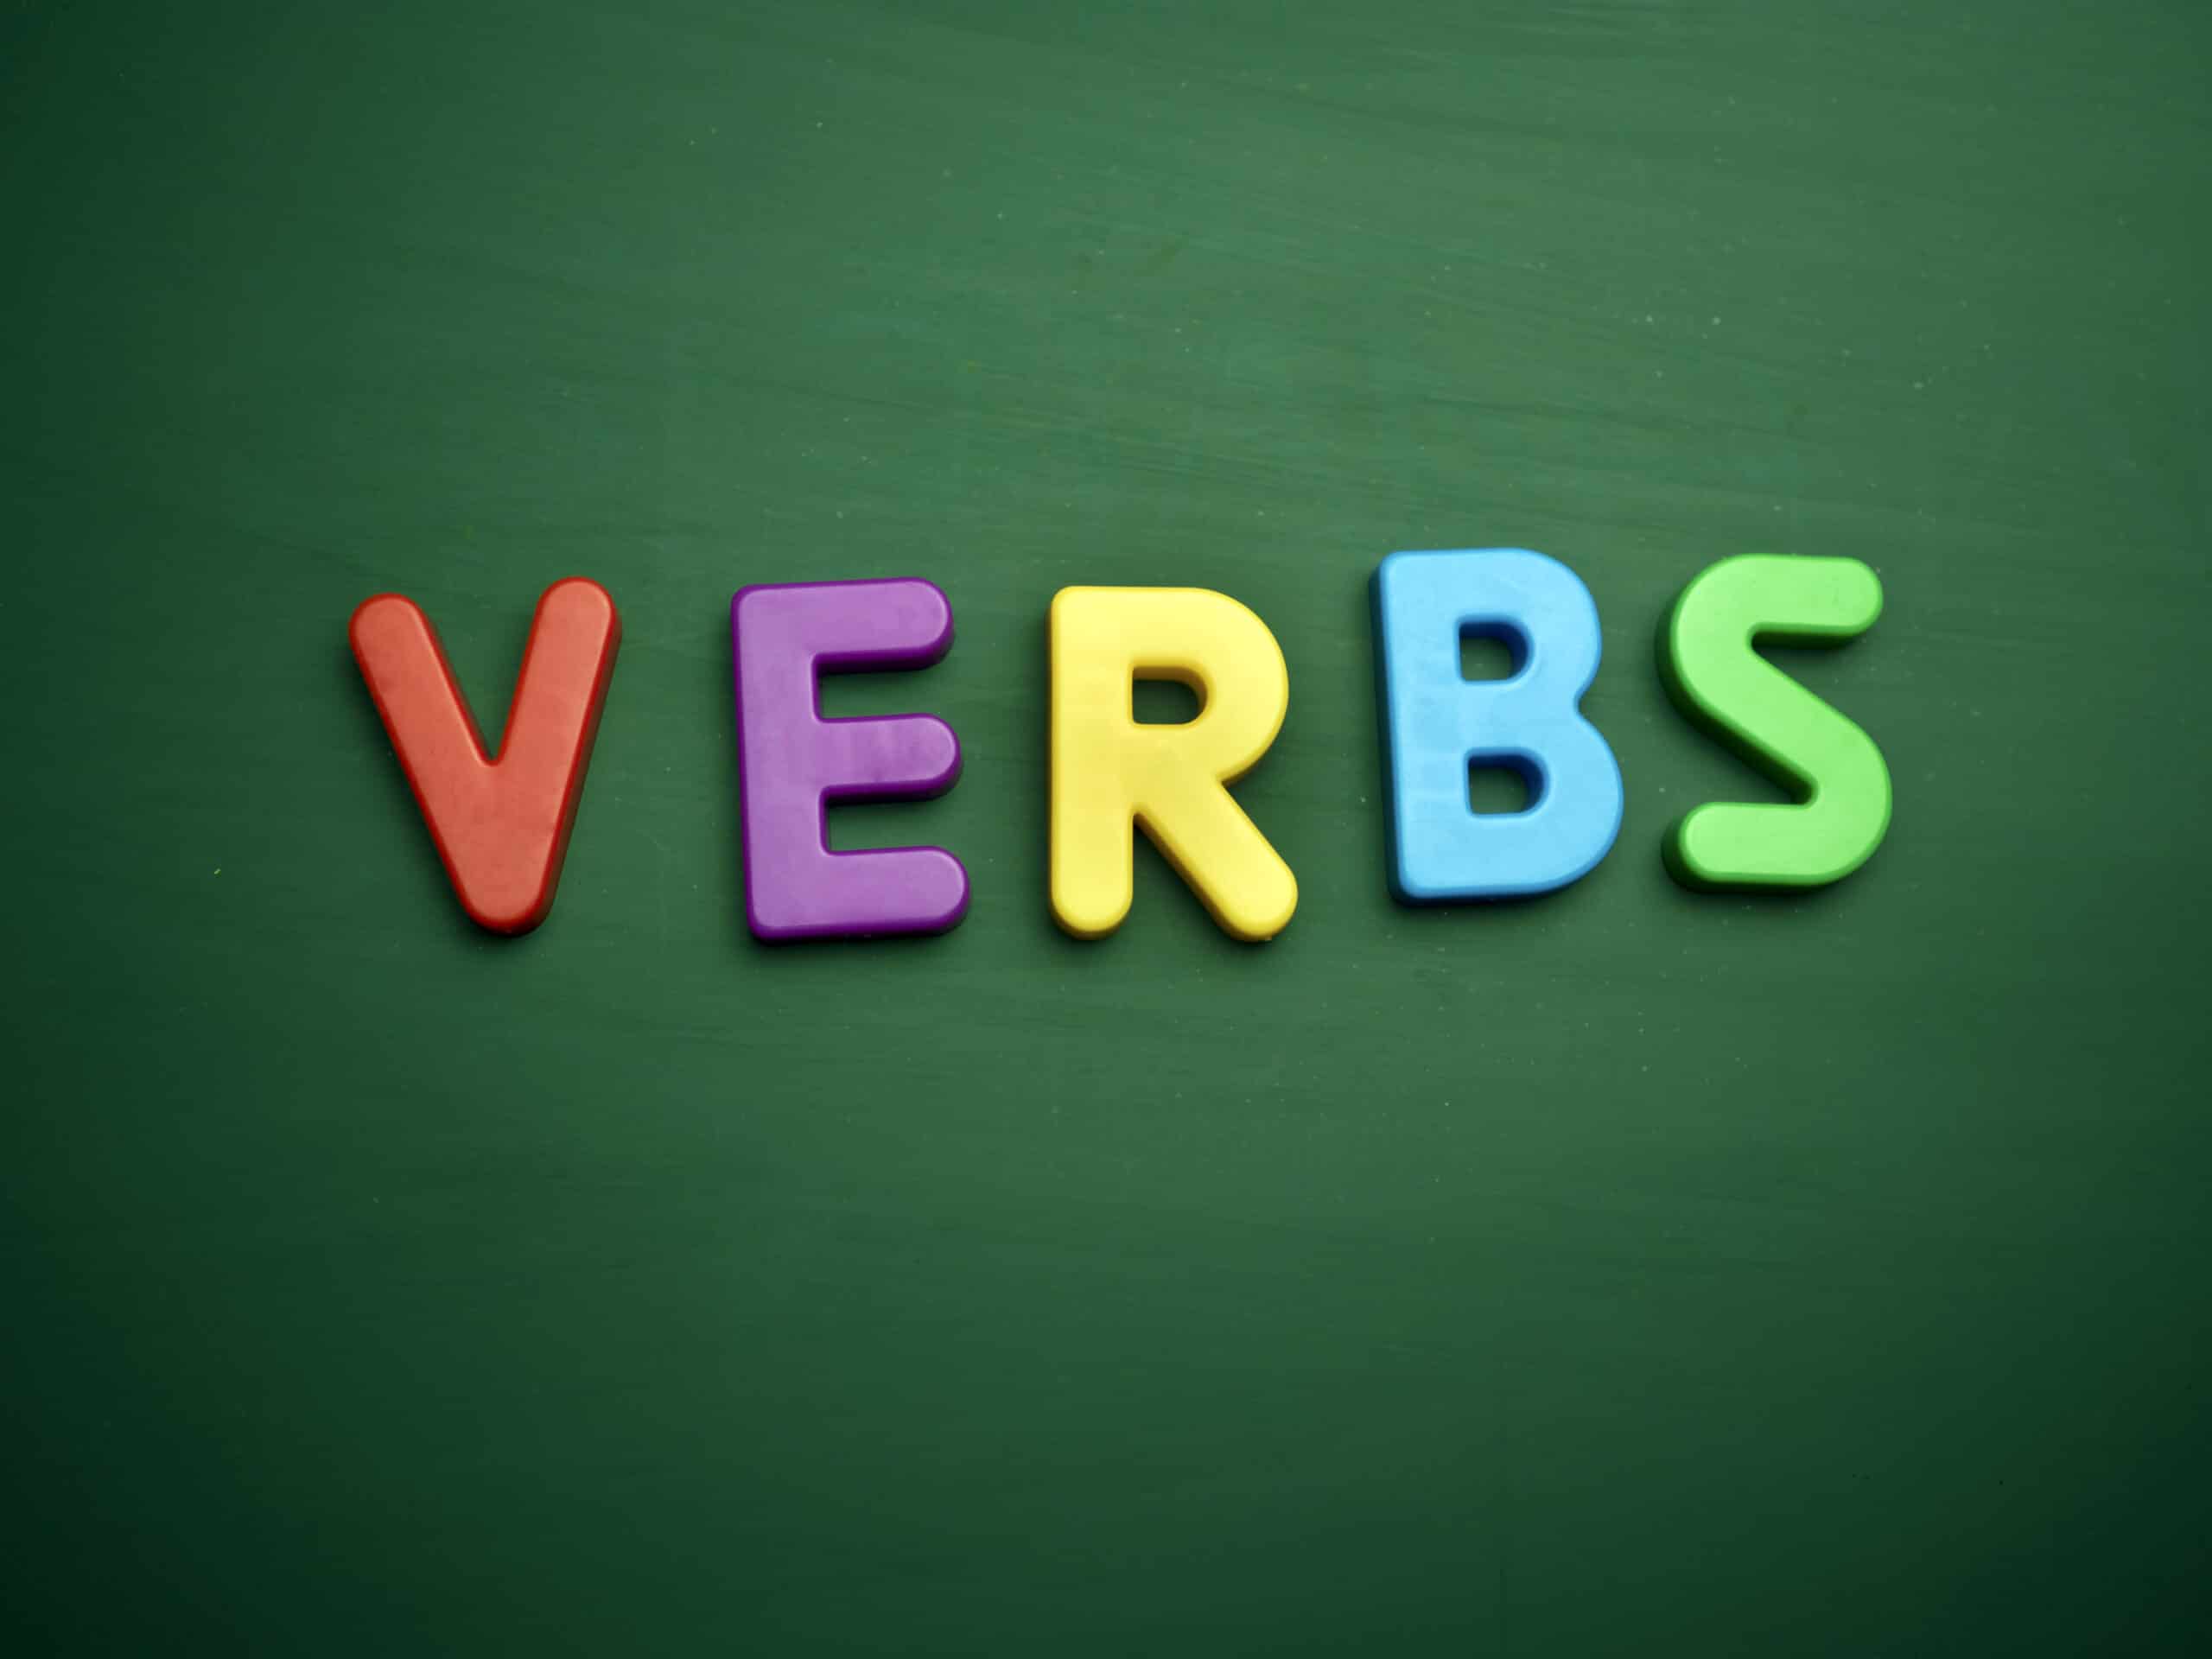 Word and Verbs